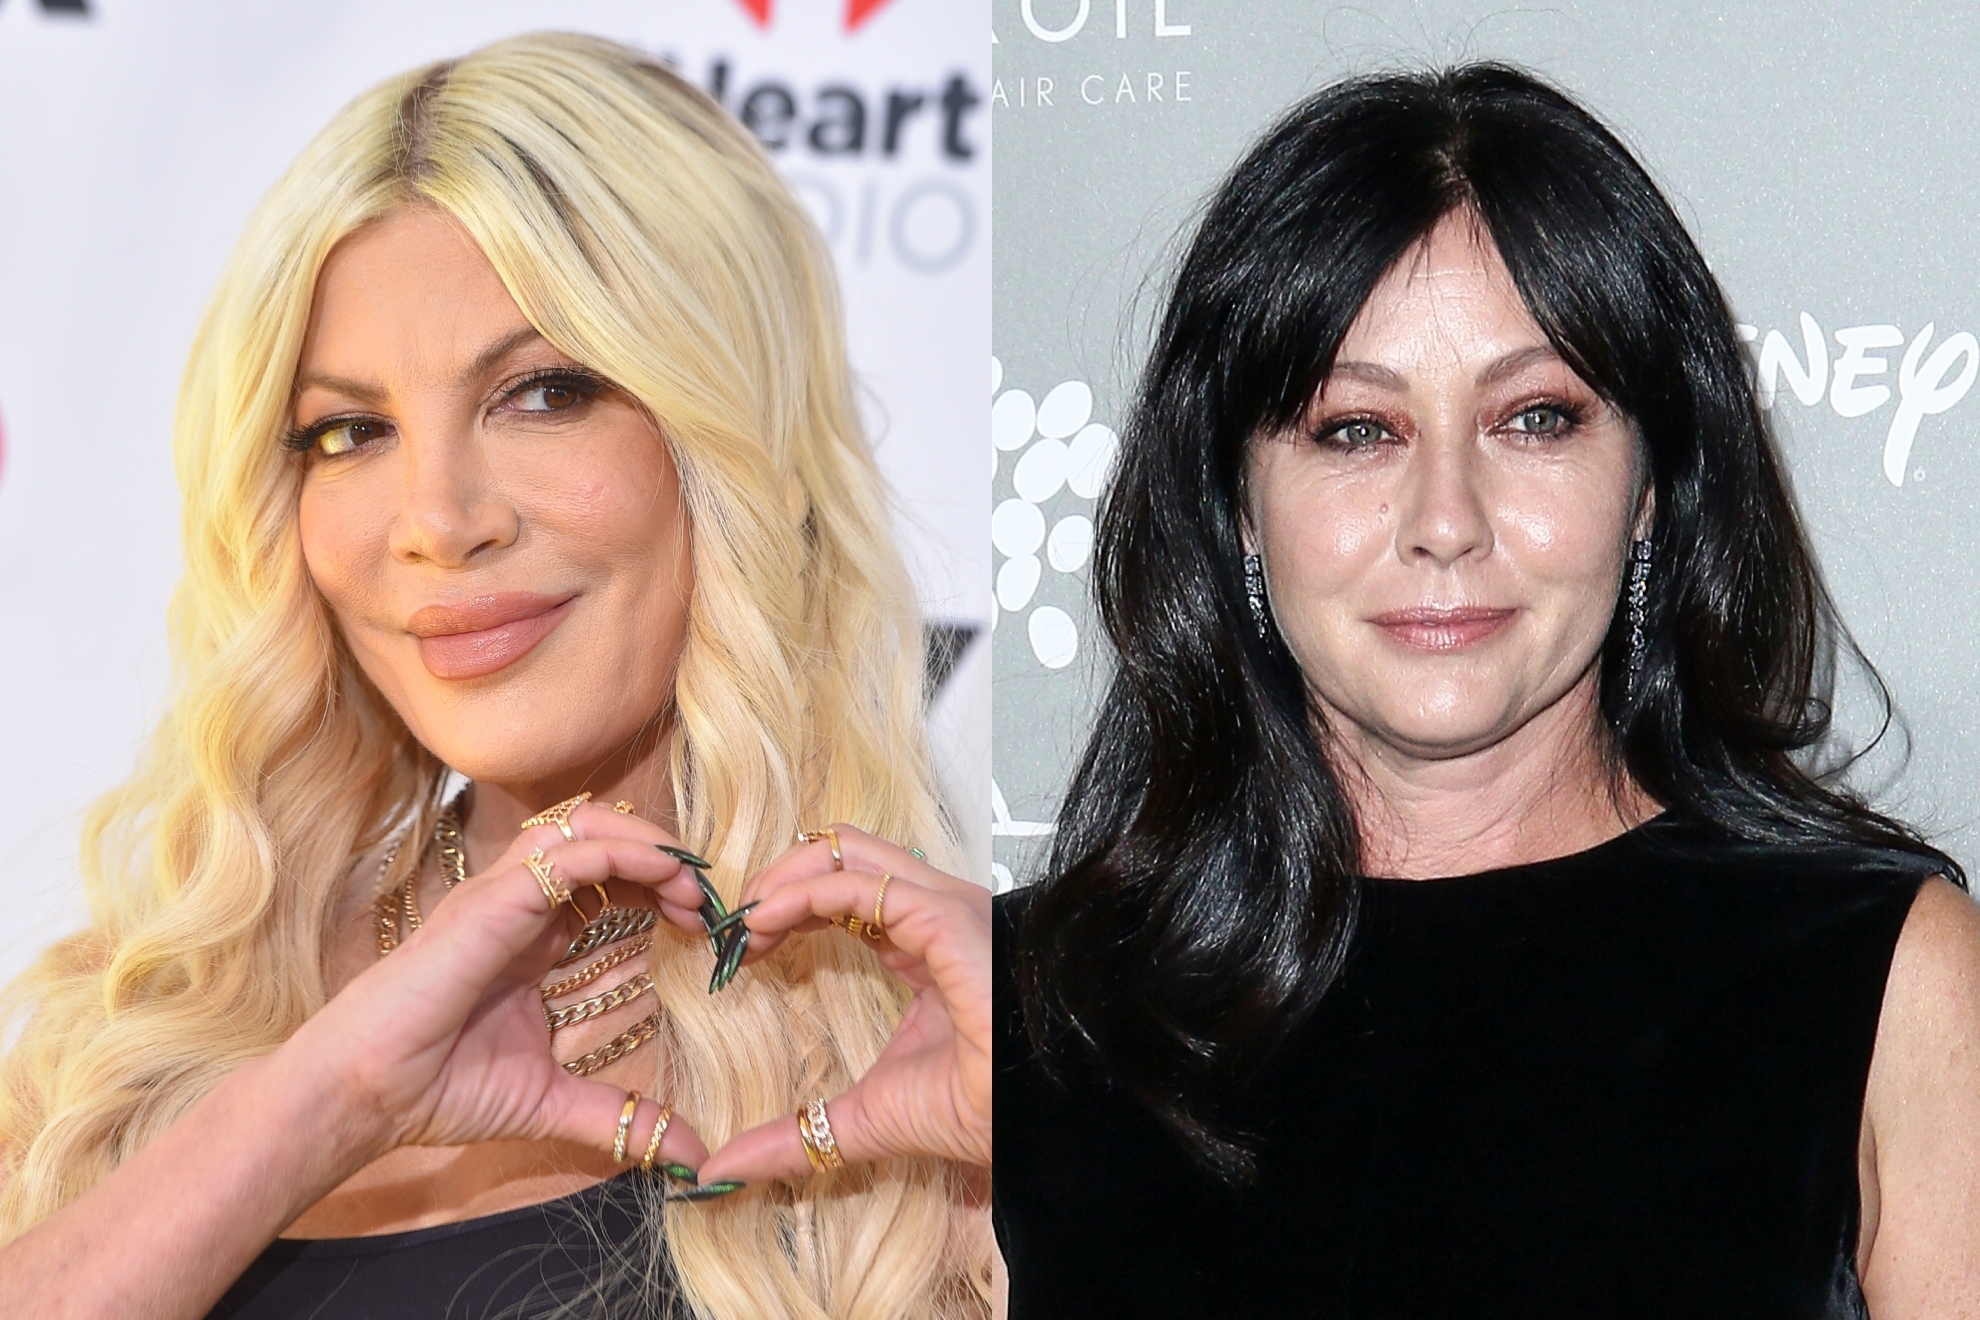 Tori Spelling and Shannen Doherty: A lost friendship gets a new beginning